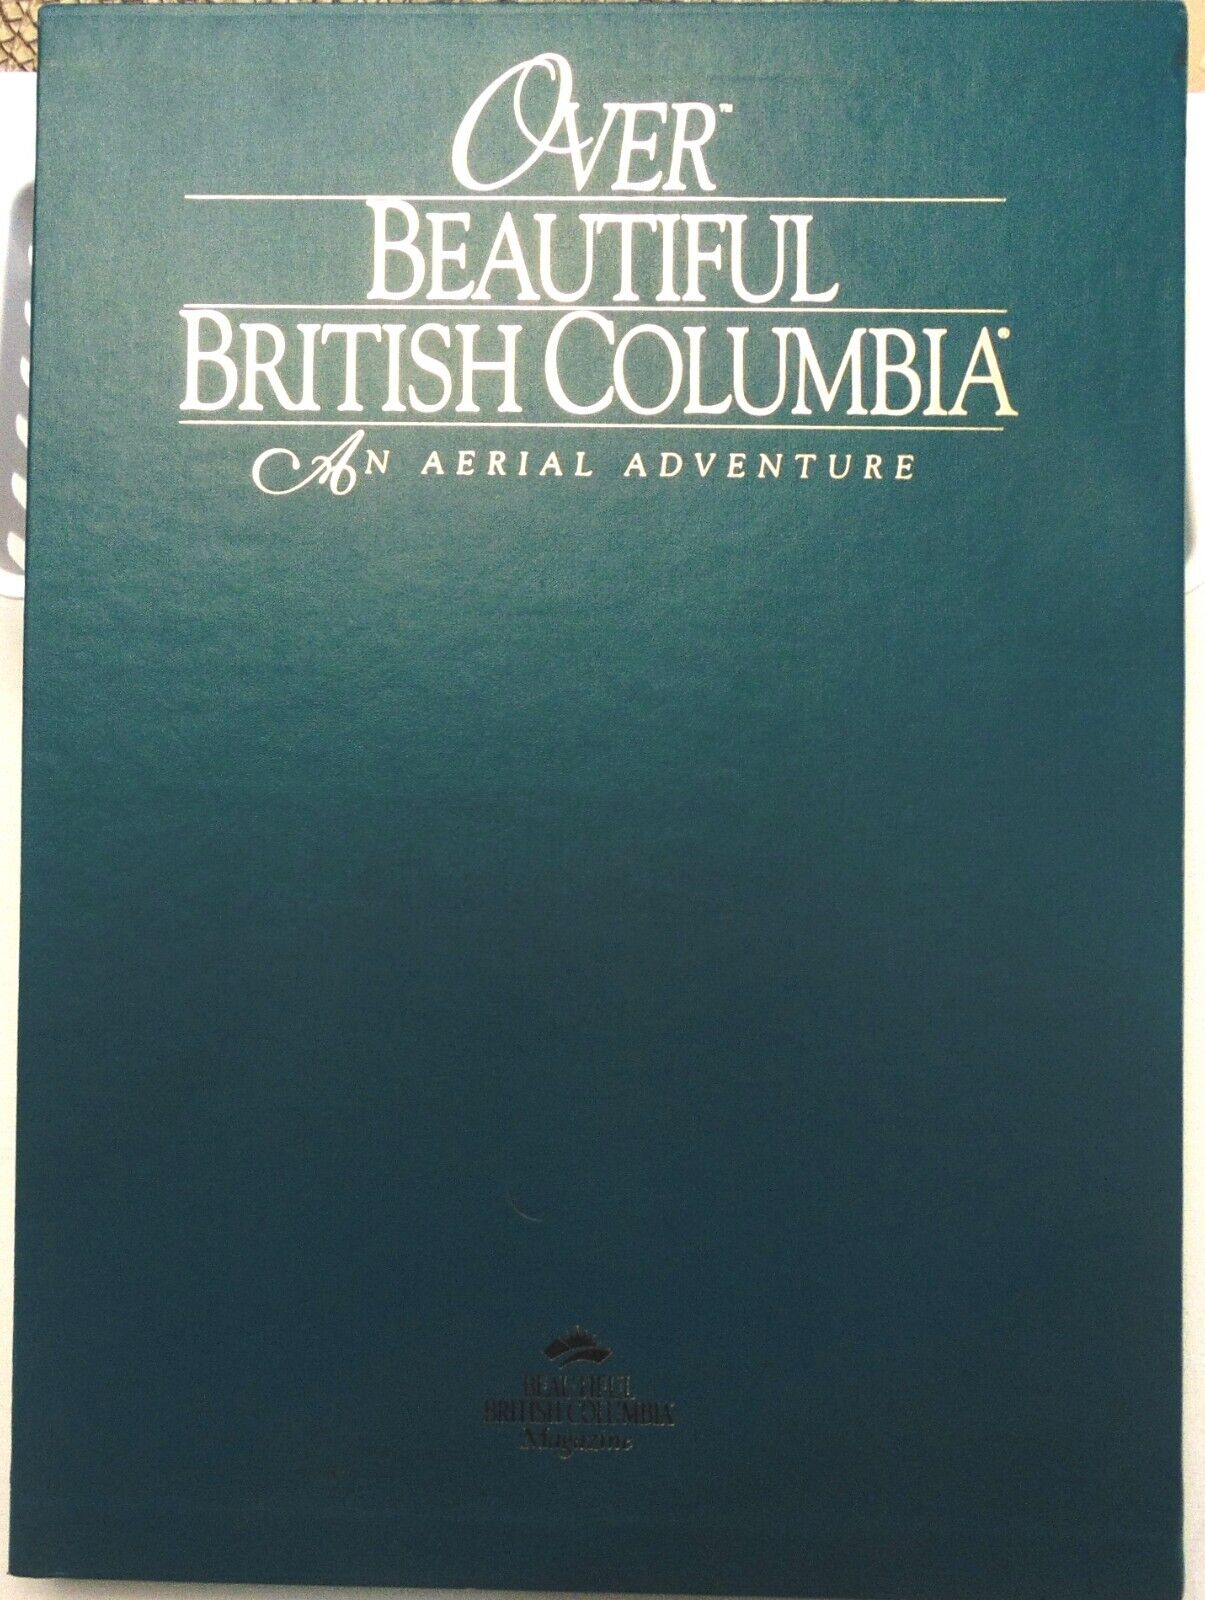 Over Beautiful British Columbia An Aerial Adventure First Printing 1960